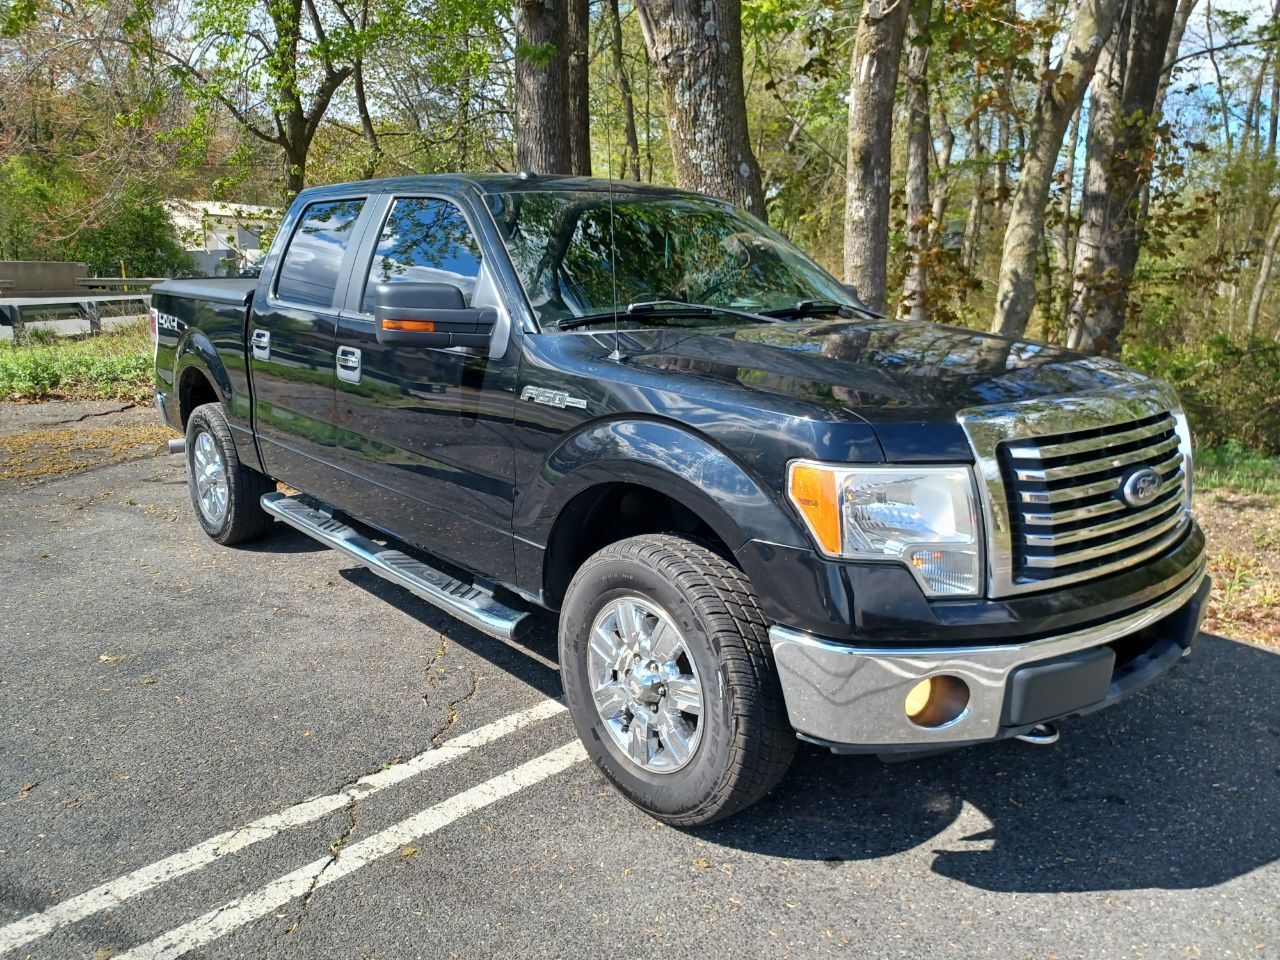 2011 Ford F-150 For Sale - Carsforsale.com®